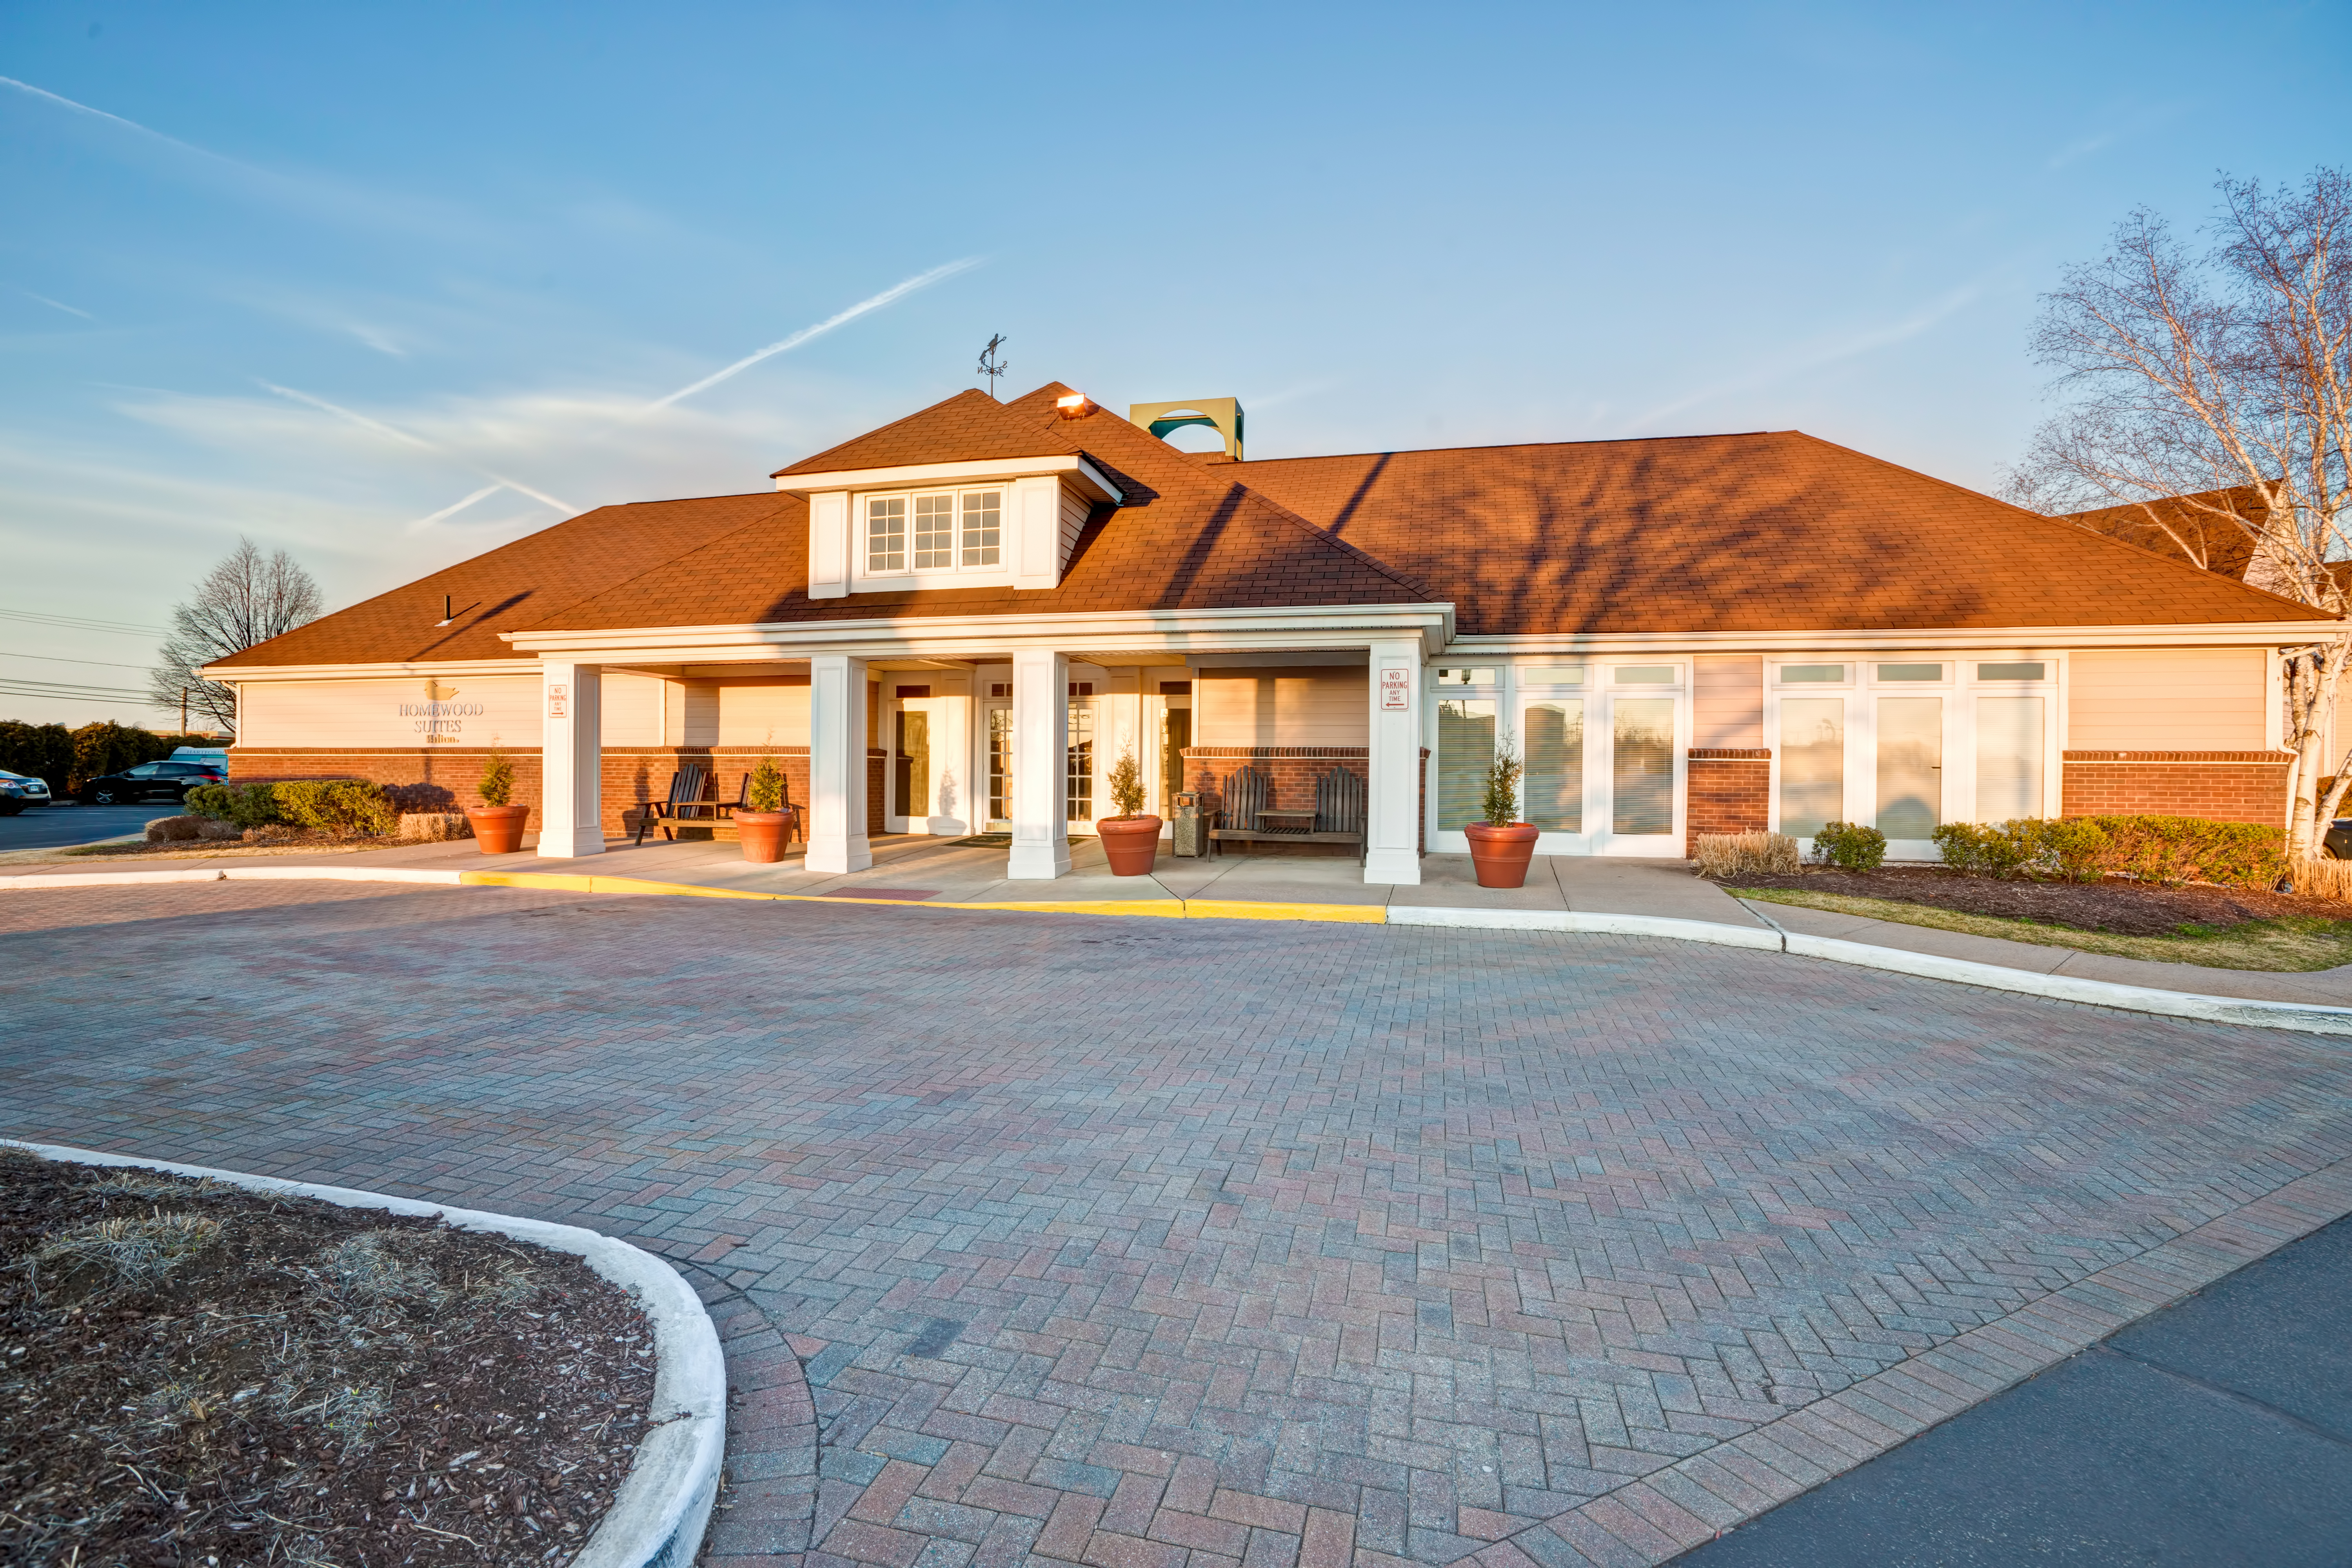 Daytime View of Hotel Exterior, Signage,  Landscaping, Circle Driveway, and Parking Lot